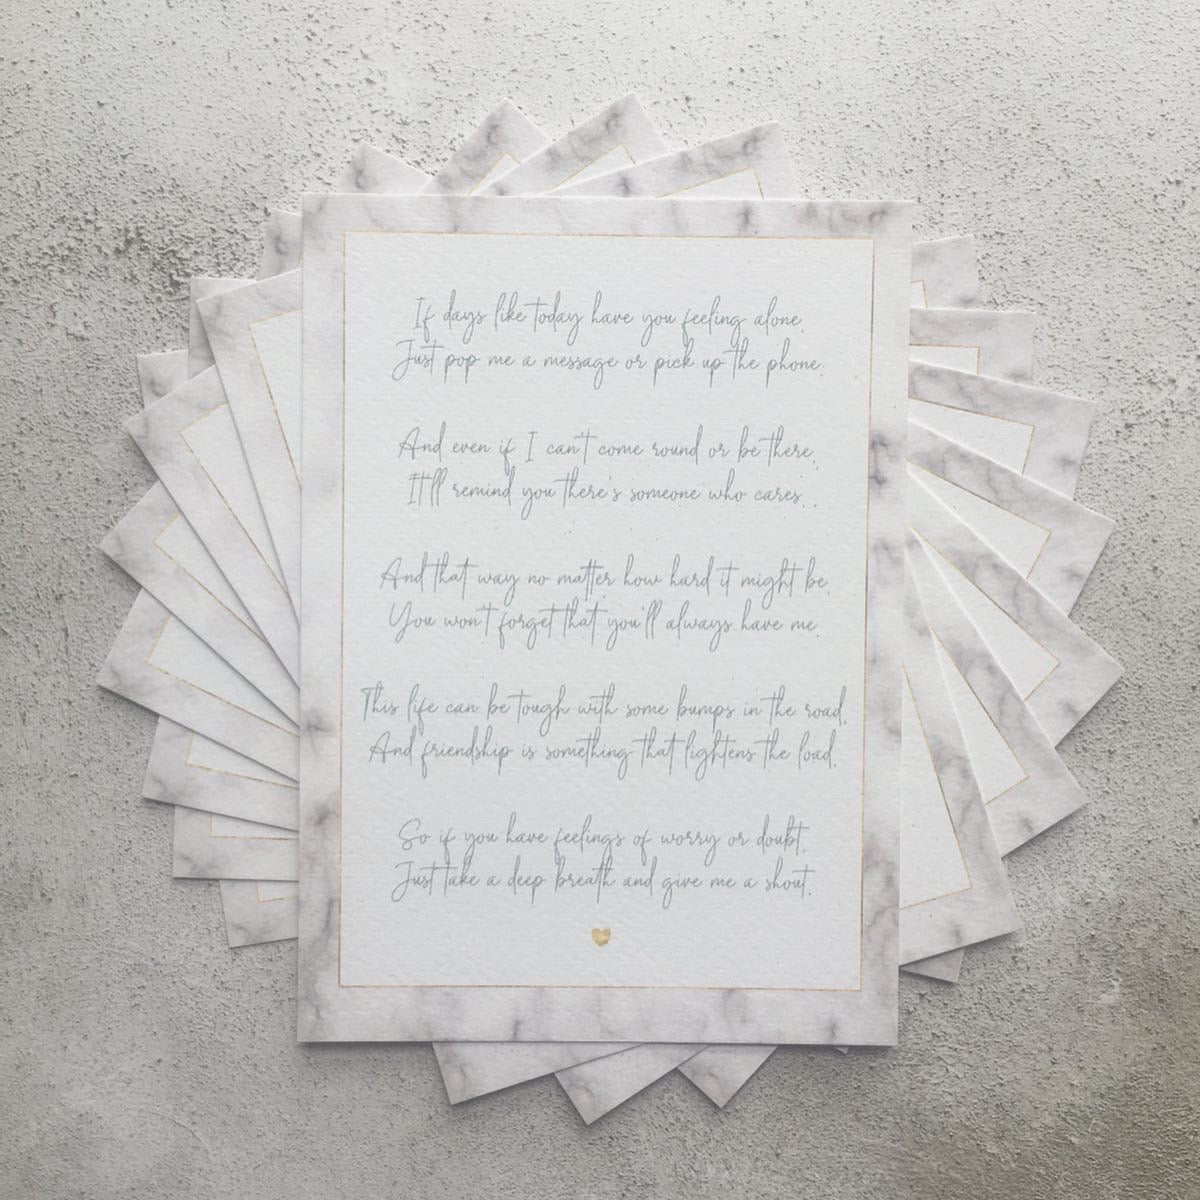 'Positivity Poem' printed onto 300gsm textured matte card. The poem is framed by a marble design, and is sized to 5x7". Envelope included, and the back is blank for a personal message to be written, if desired. The poem promotes friendship and mental wellbeing during the Covid-19 lockdown/self-isolation period.